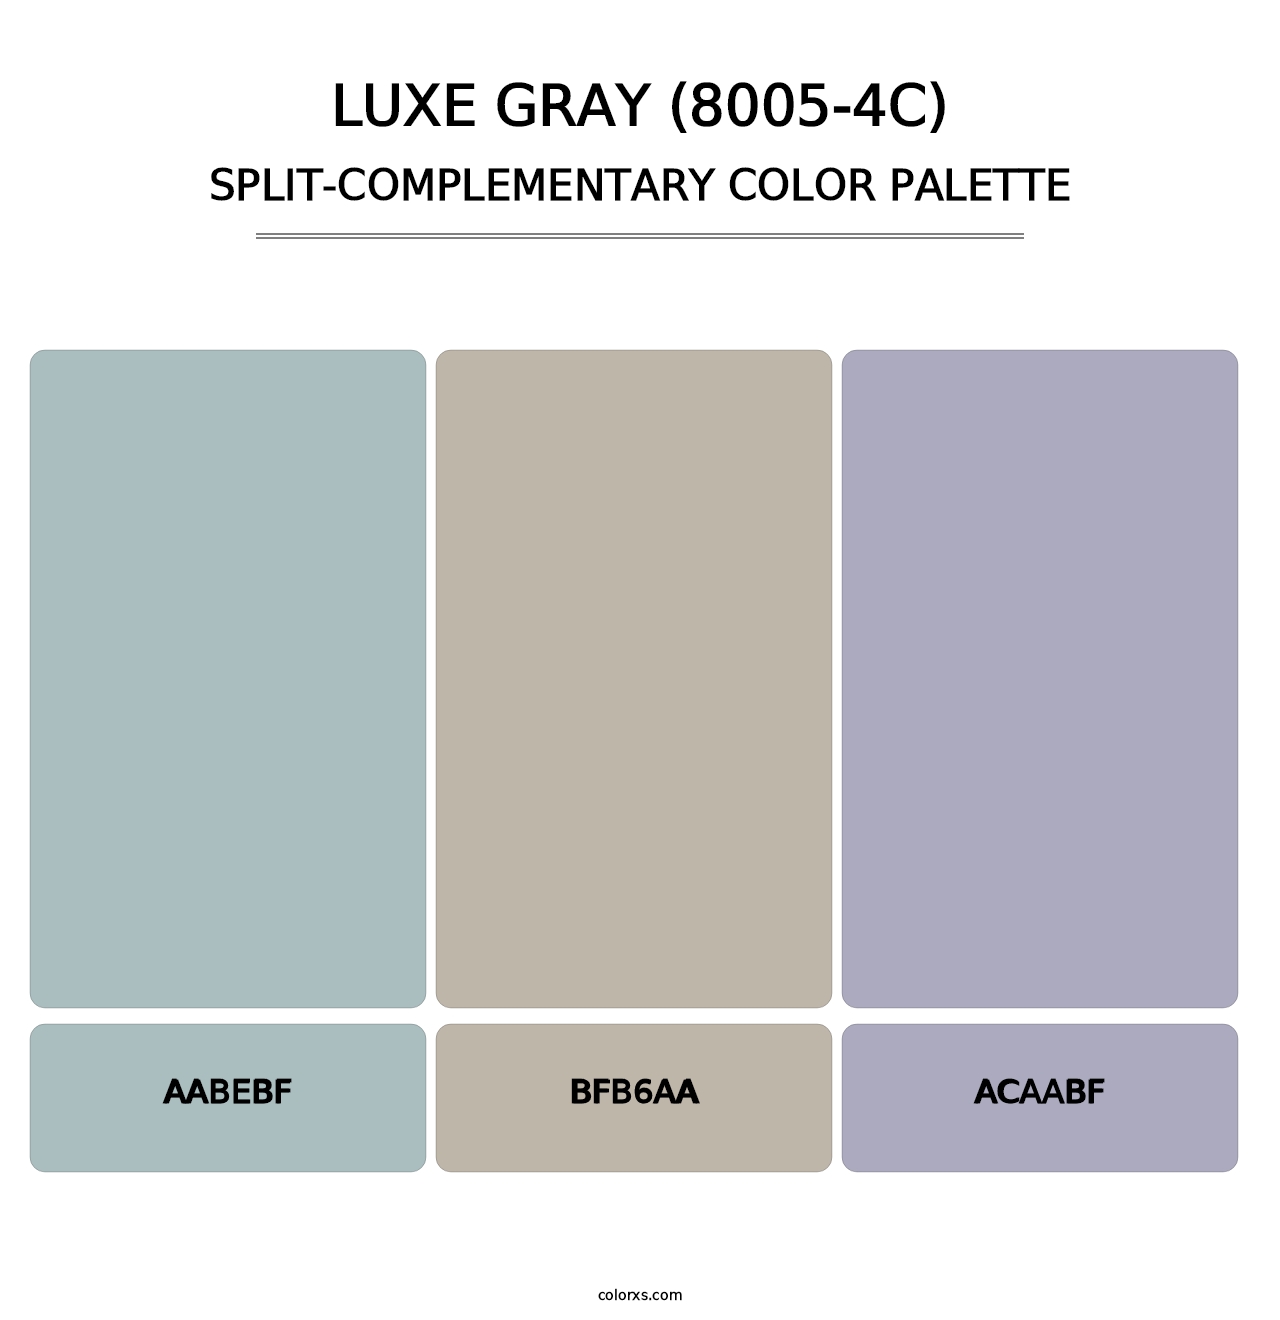 Luxe Gray (8005-4C) - Split-Complementary Color Palette